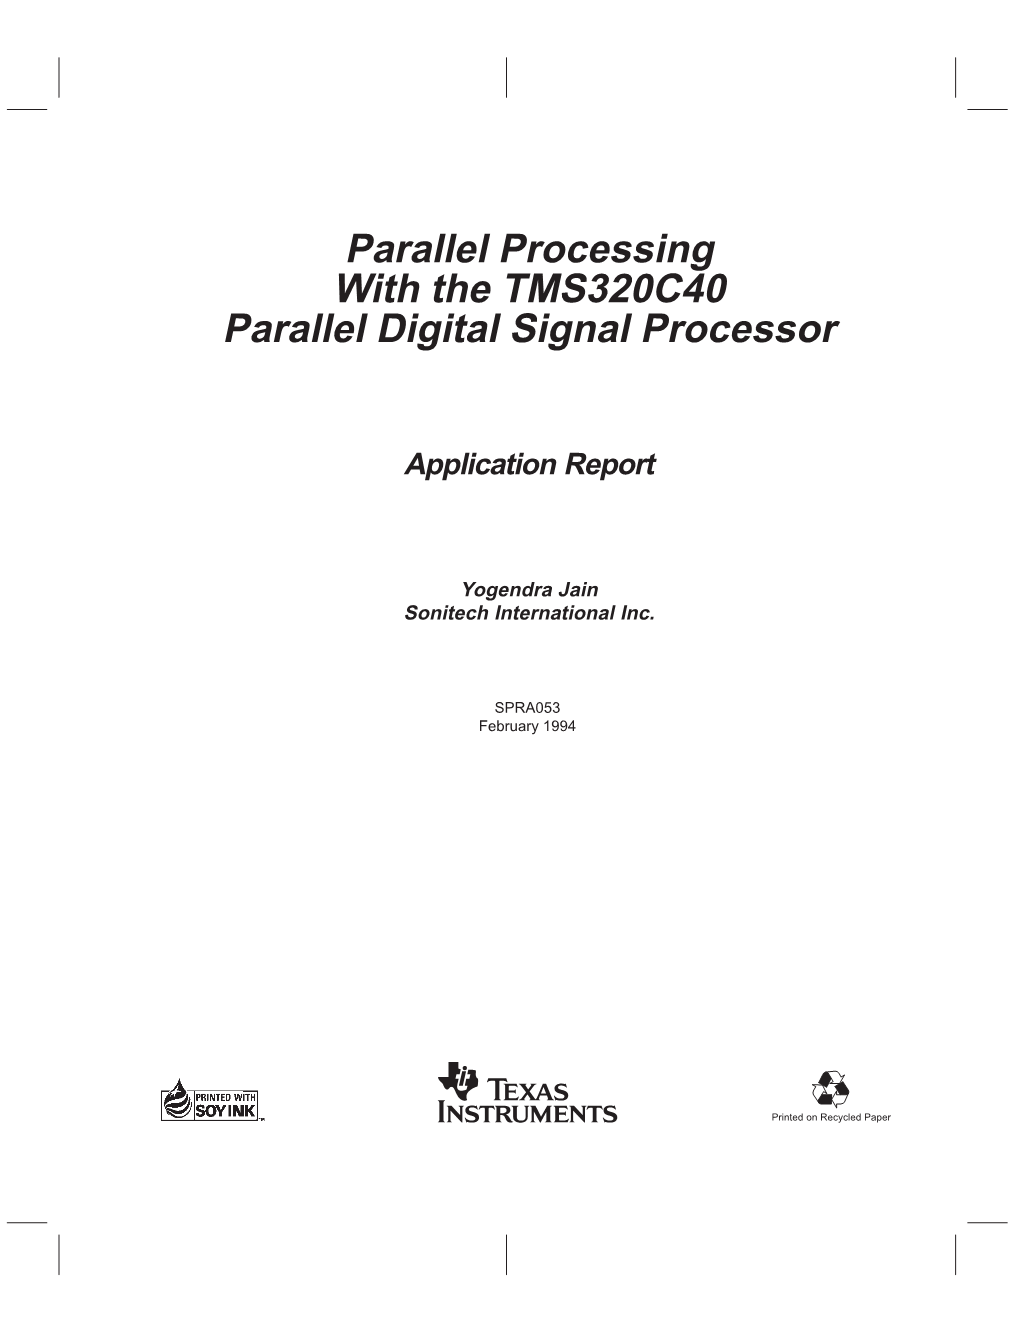 Parallel Processing with the TMS320C40 Parallel Digital Signal Processor